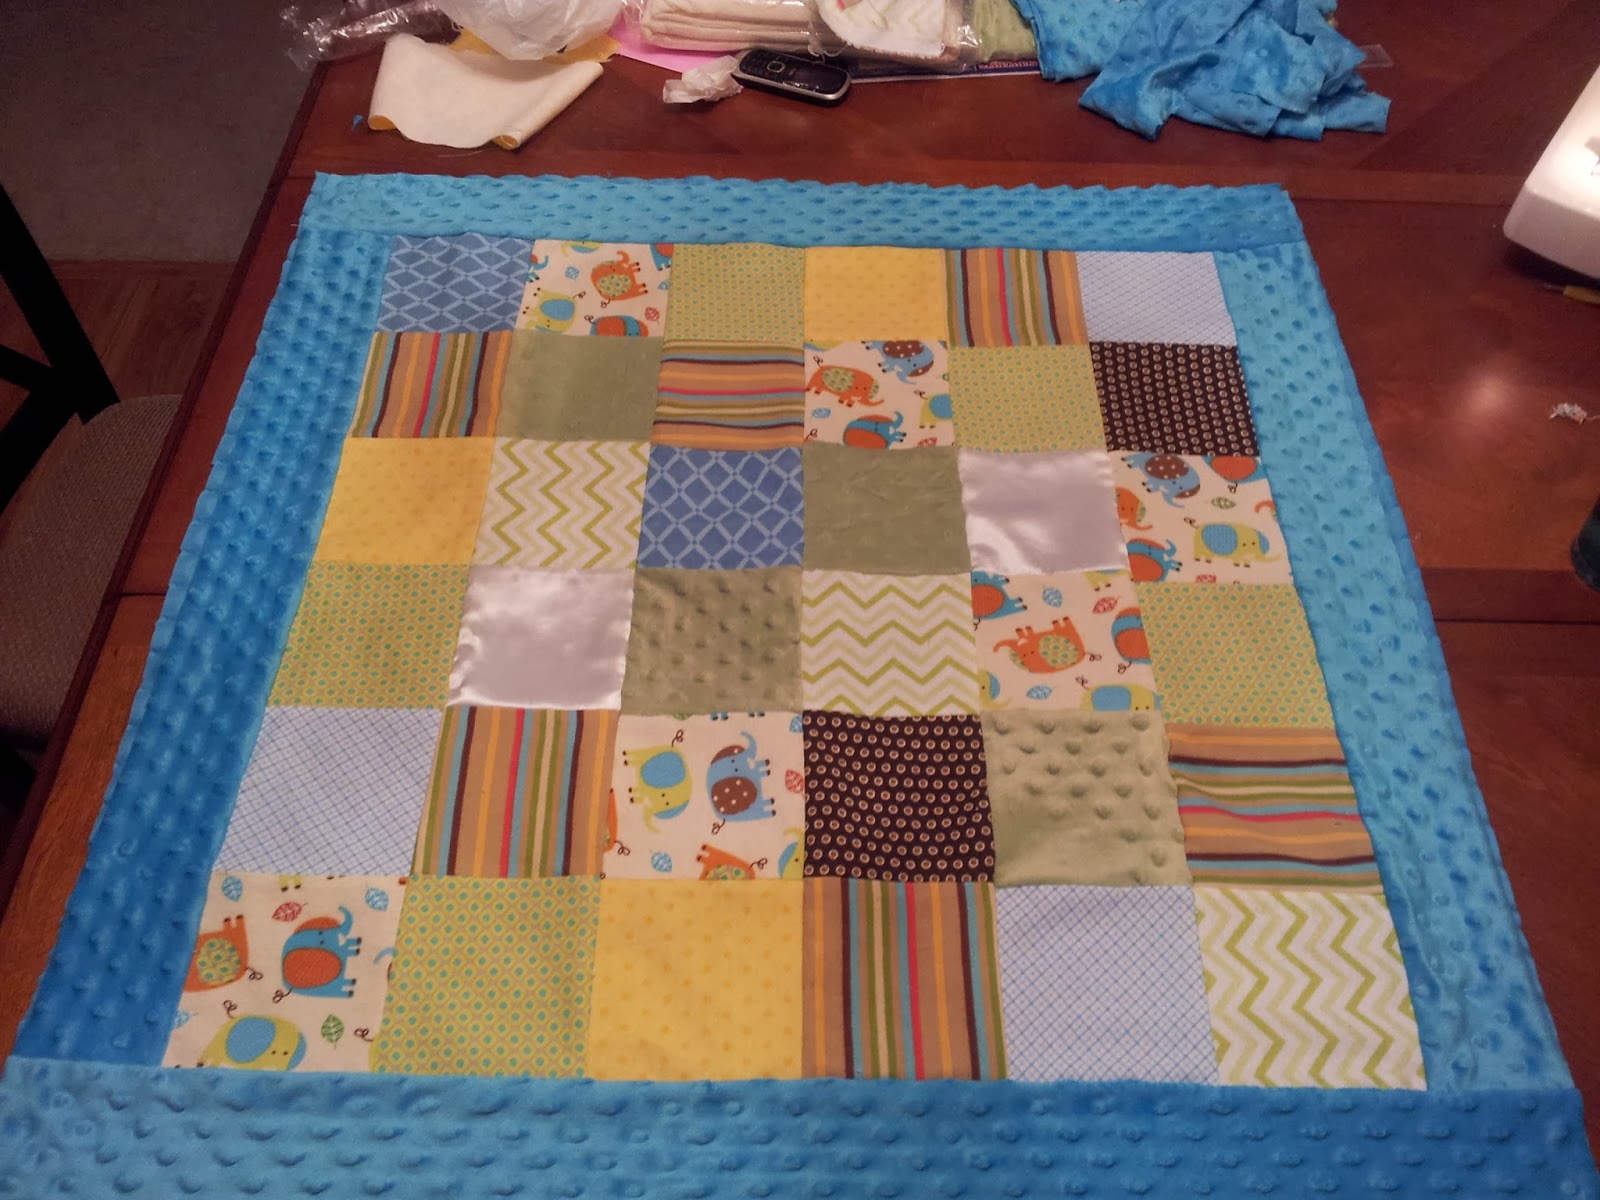 A Canadian in Colorado: New Nephew = New Quilt Project